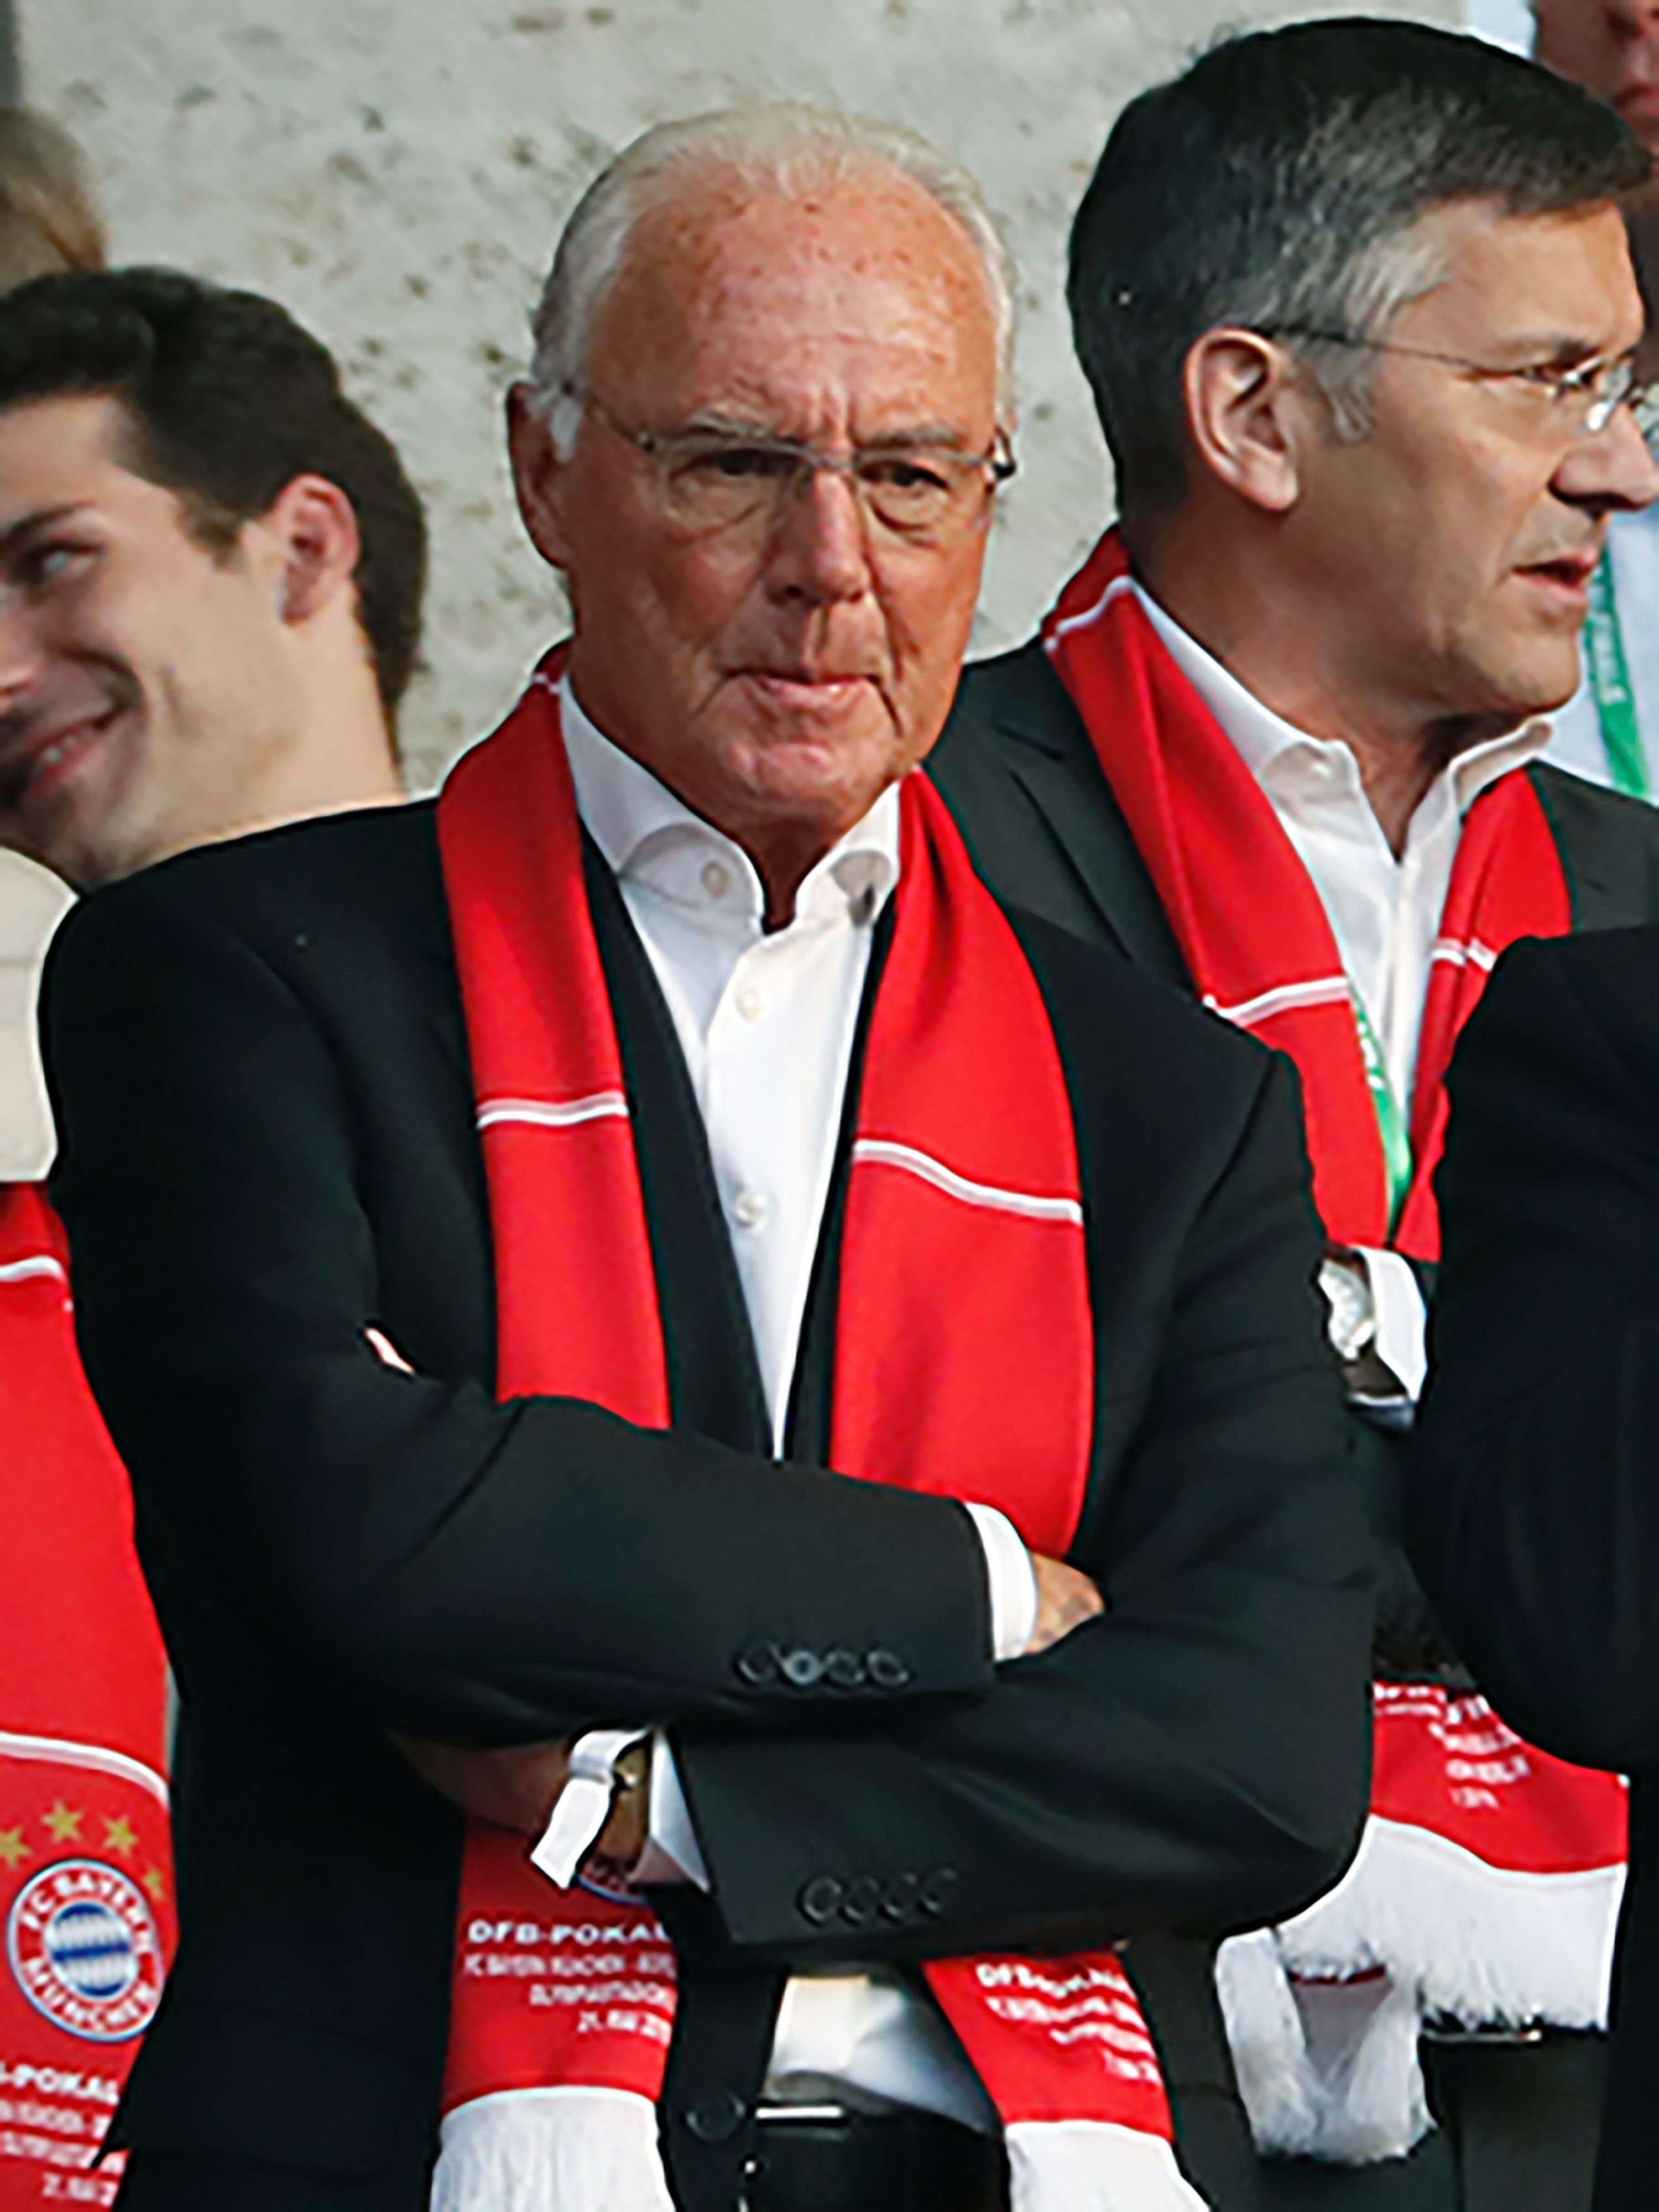 Franz Beckenbauer pictured in May as honorary president of Bayern Munich at the German Cup final between Bayern and Borussia Dortmund in Berlin. Beckenbauer had heart surgery at the weekend. Photo: AFP